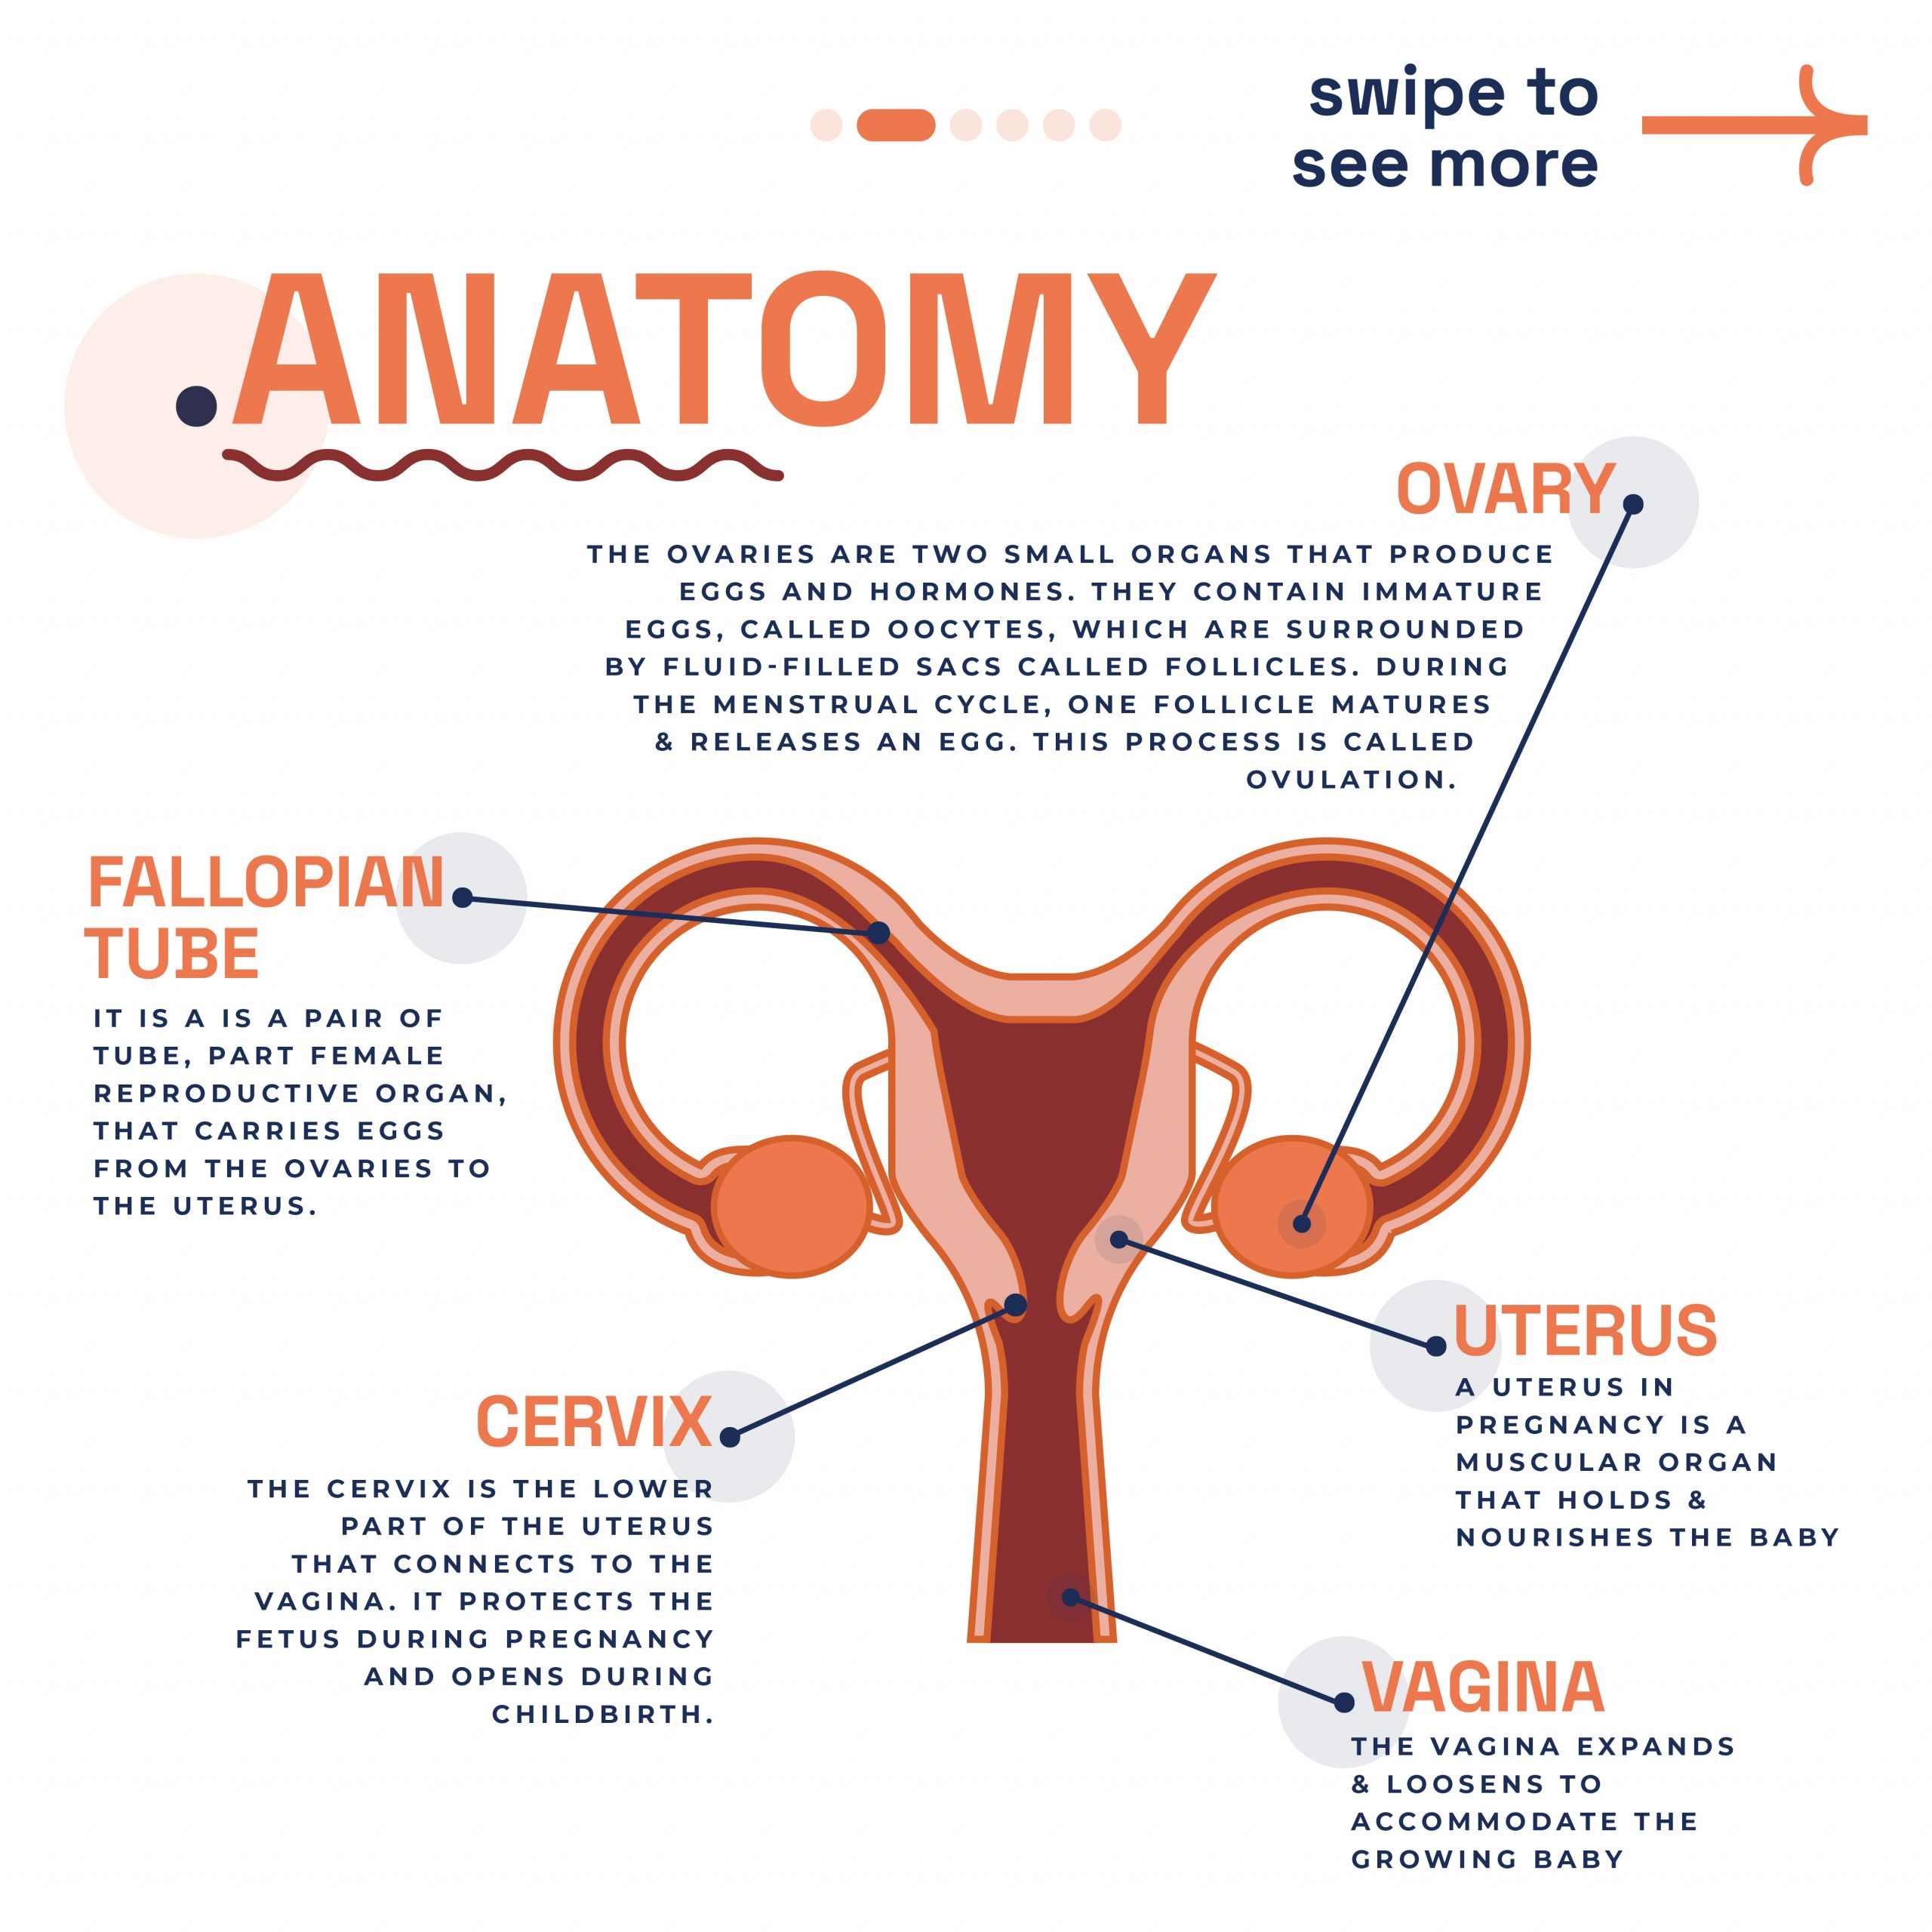 Educational diagram of female reproductive anatomy focusing on the fallopian tubes provided by London Pregnancy Clinic.